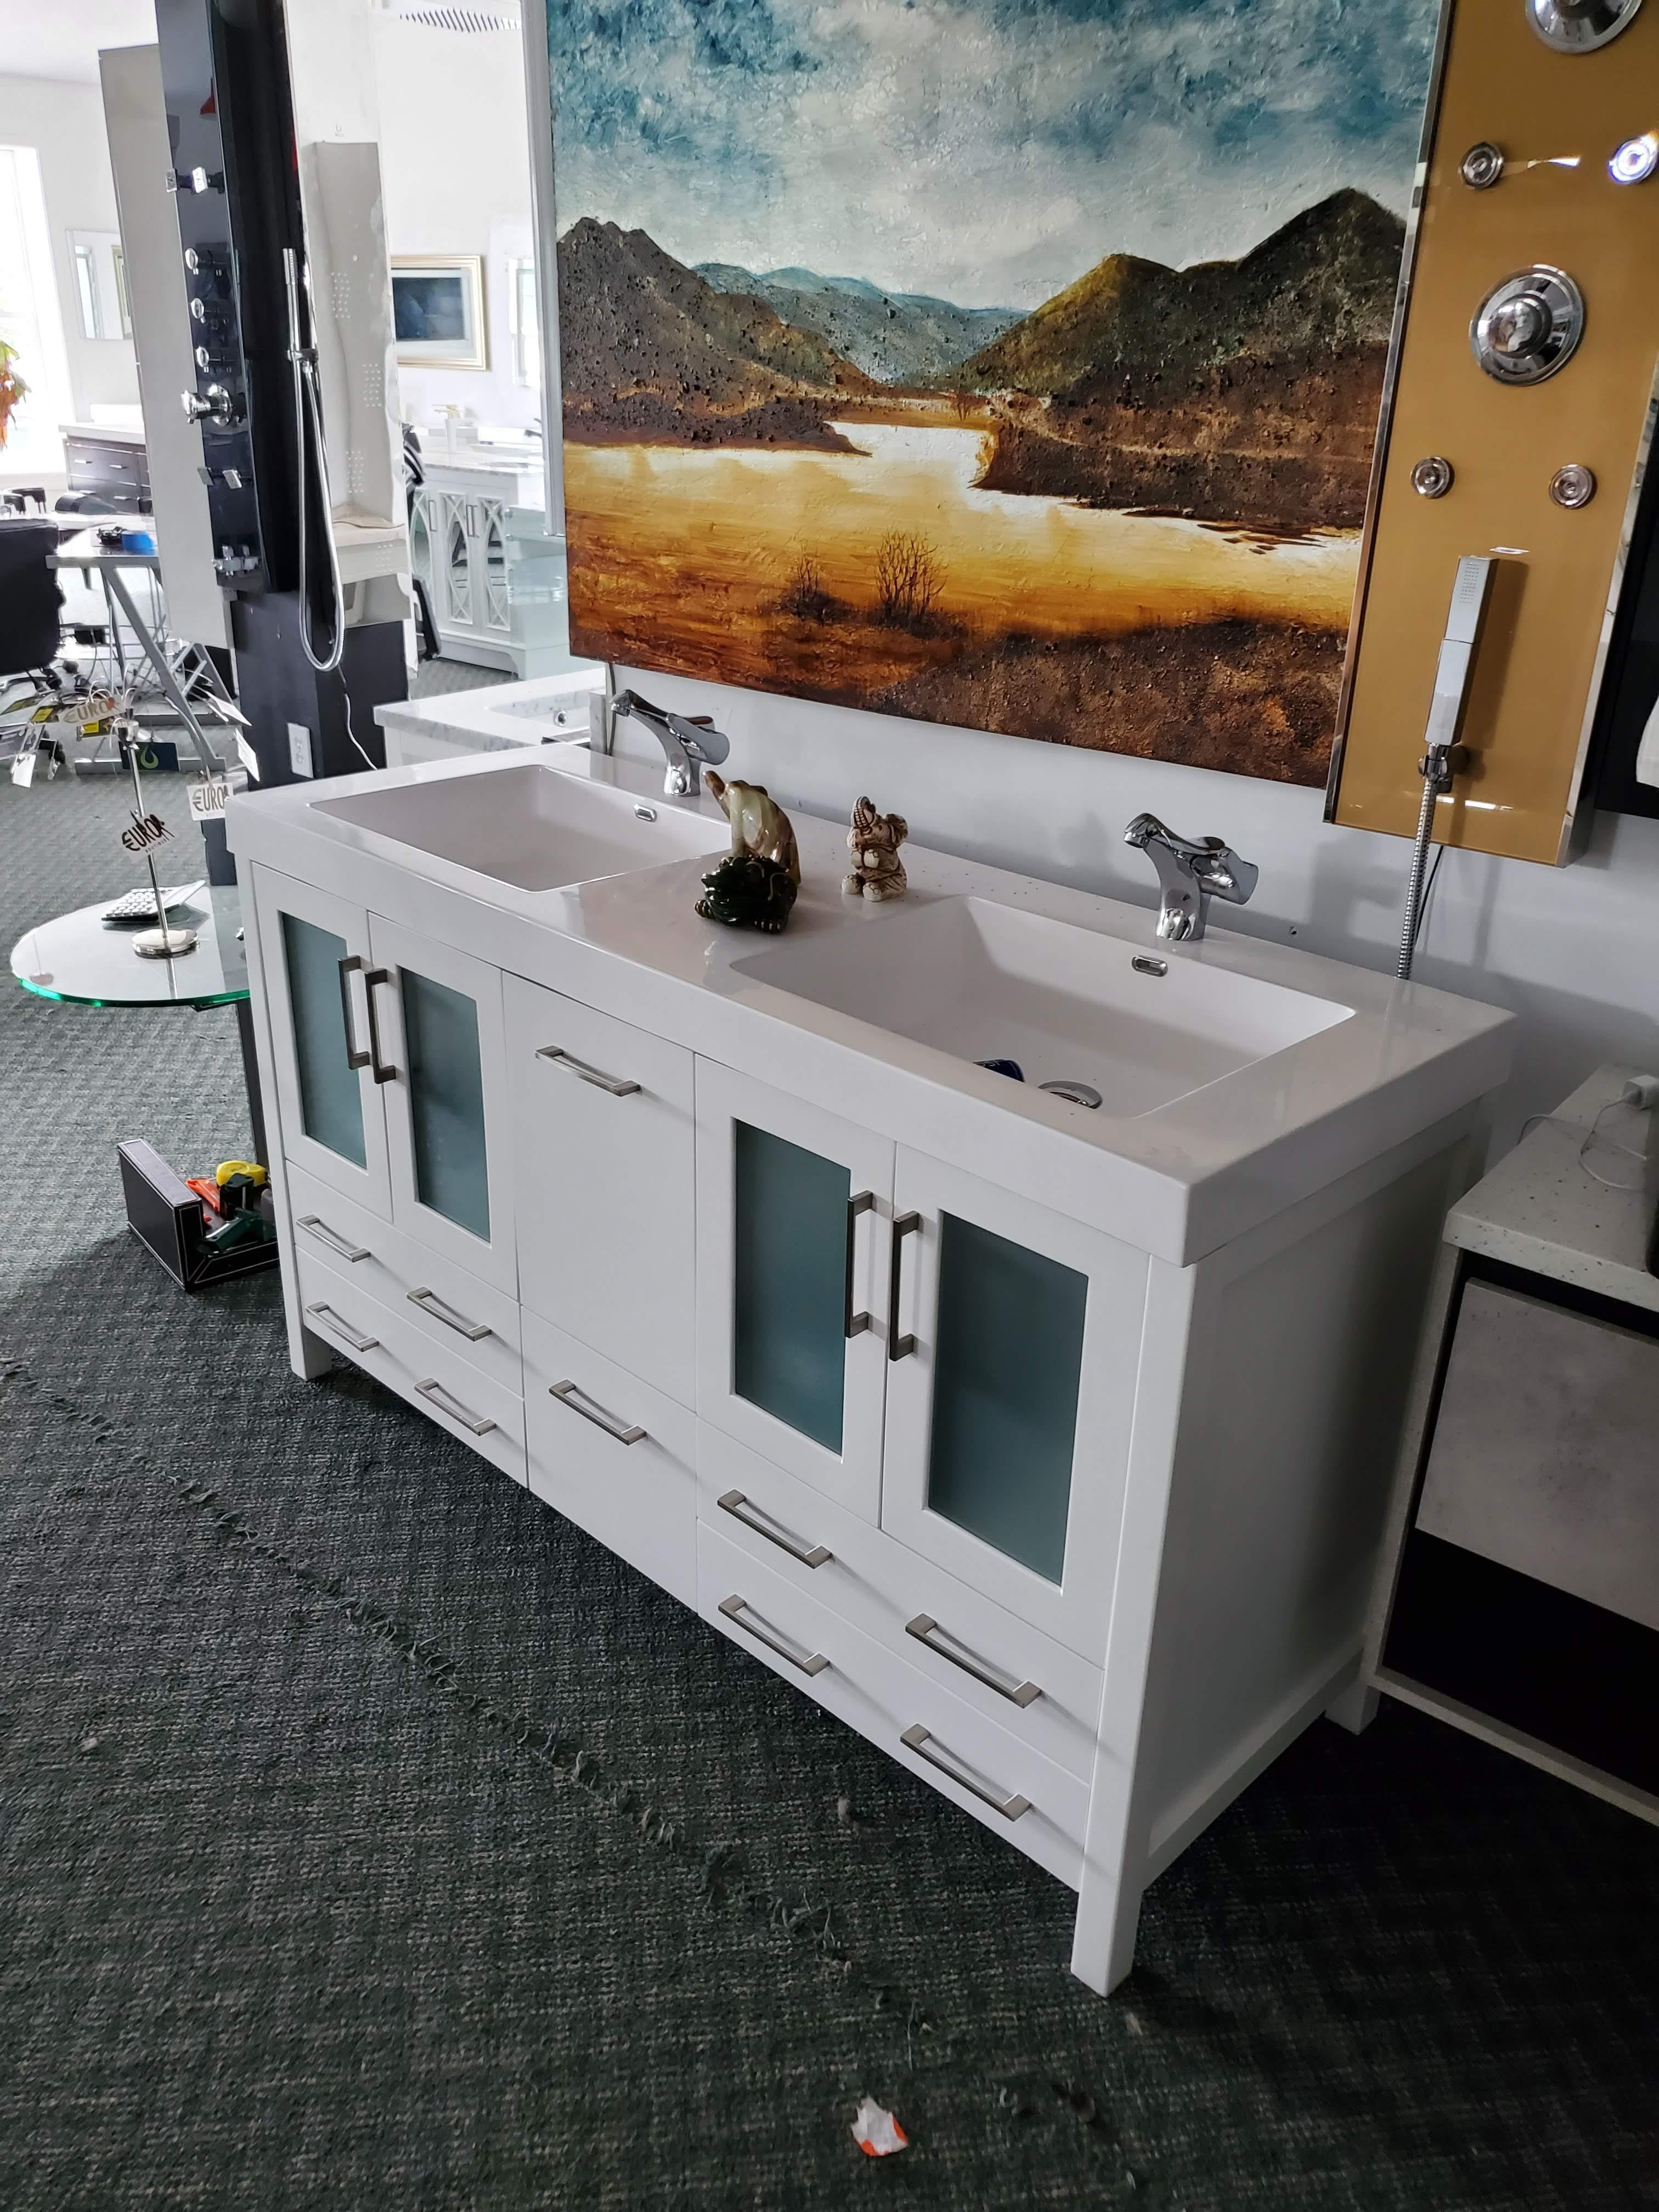 ONLINE AUCTION ONLY: Building Materials & Supplies Featuring High End Complete Bathroom Vanities, Faucets, Shower Fixtures